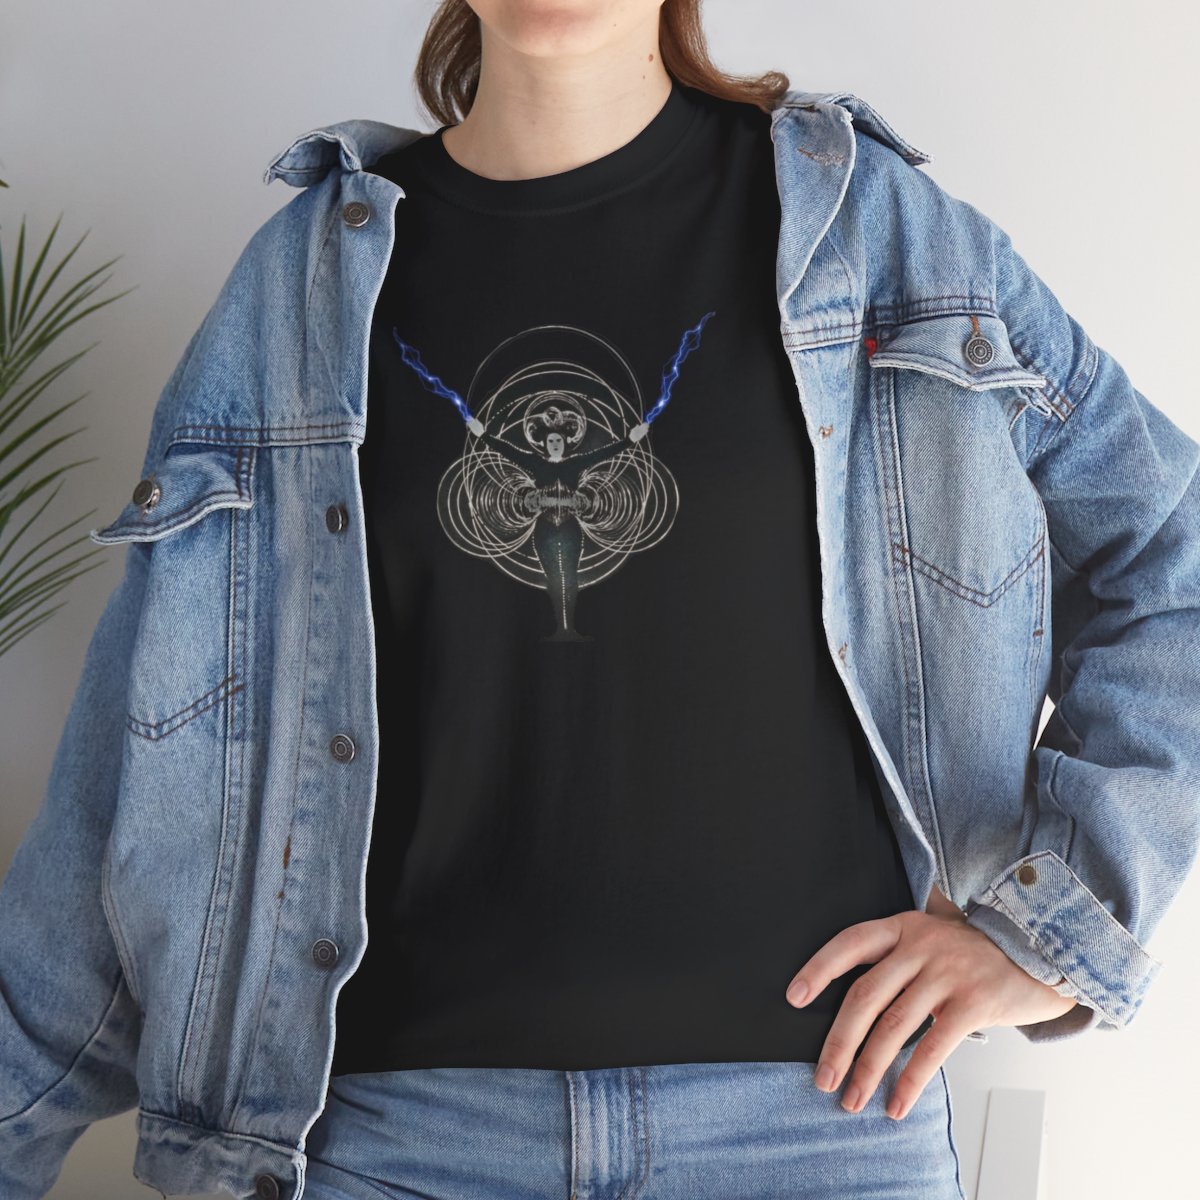 ElectroSwing Heavy Cotton Tee (Comes with free VR Game) product thumbnail image